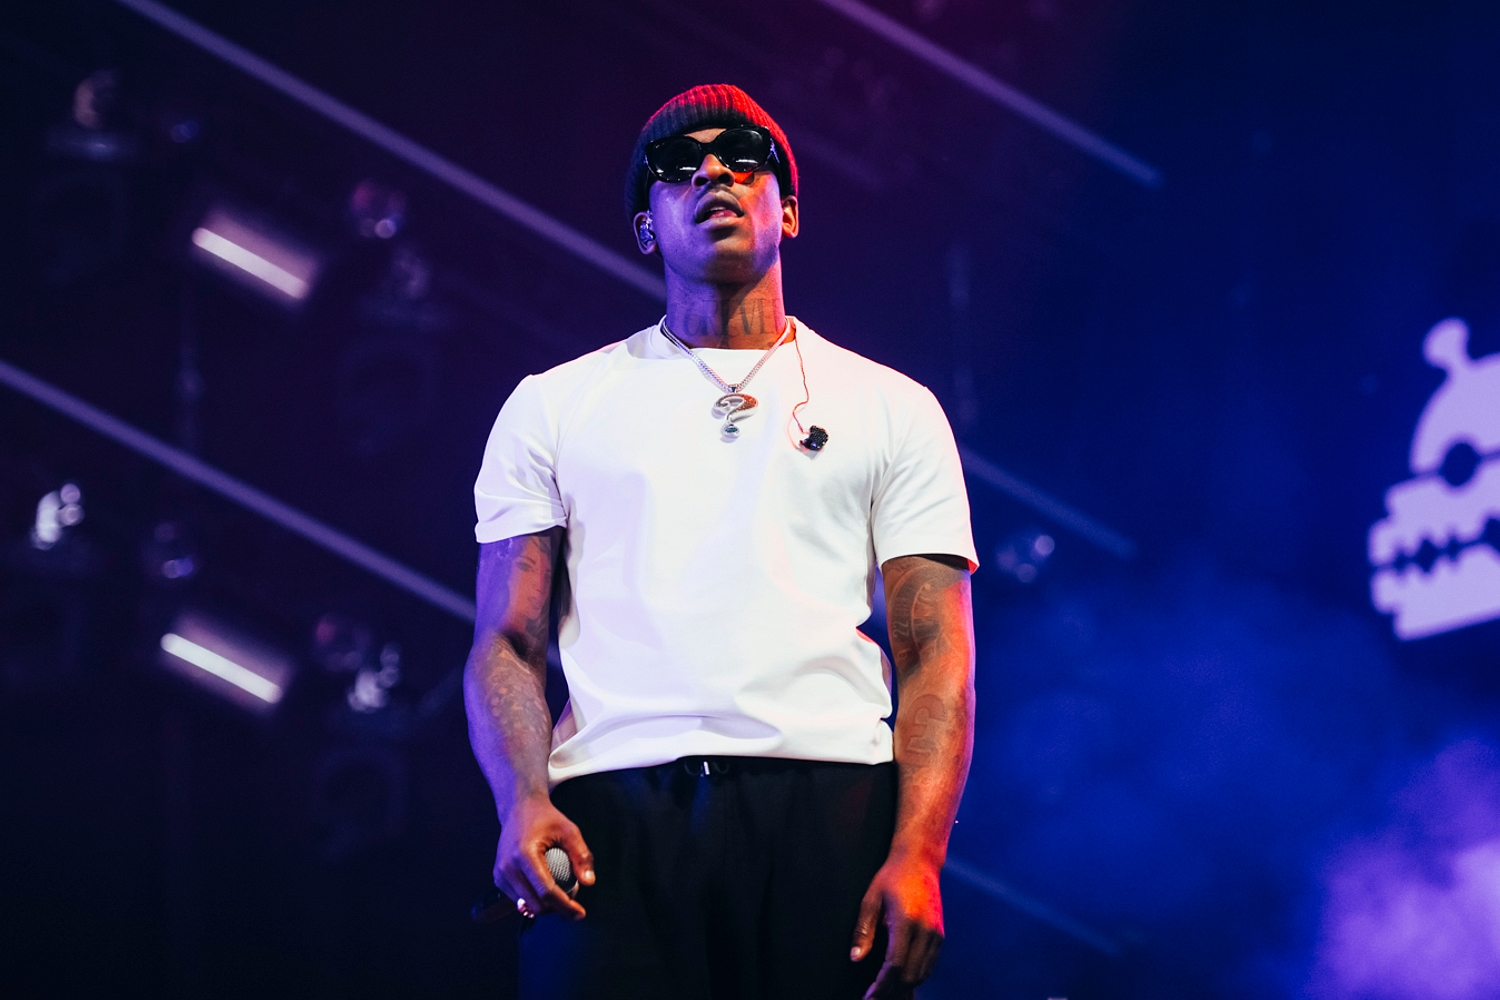 Skepta disses Wiley in new track ‘Wish You Were Here’